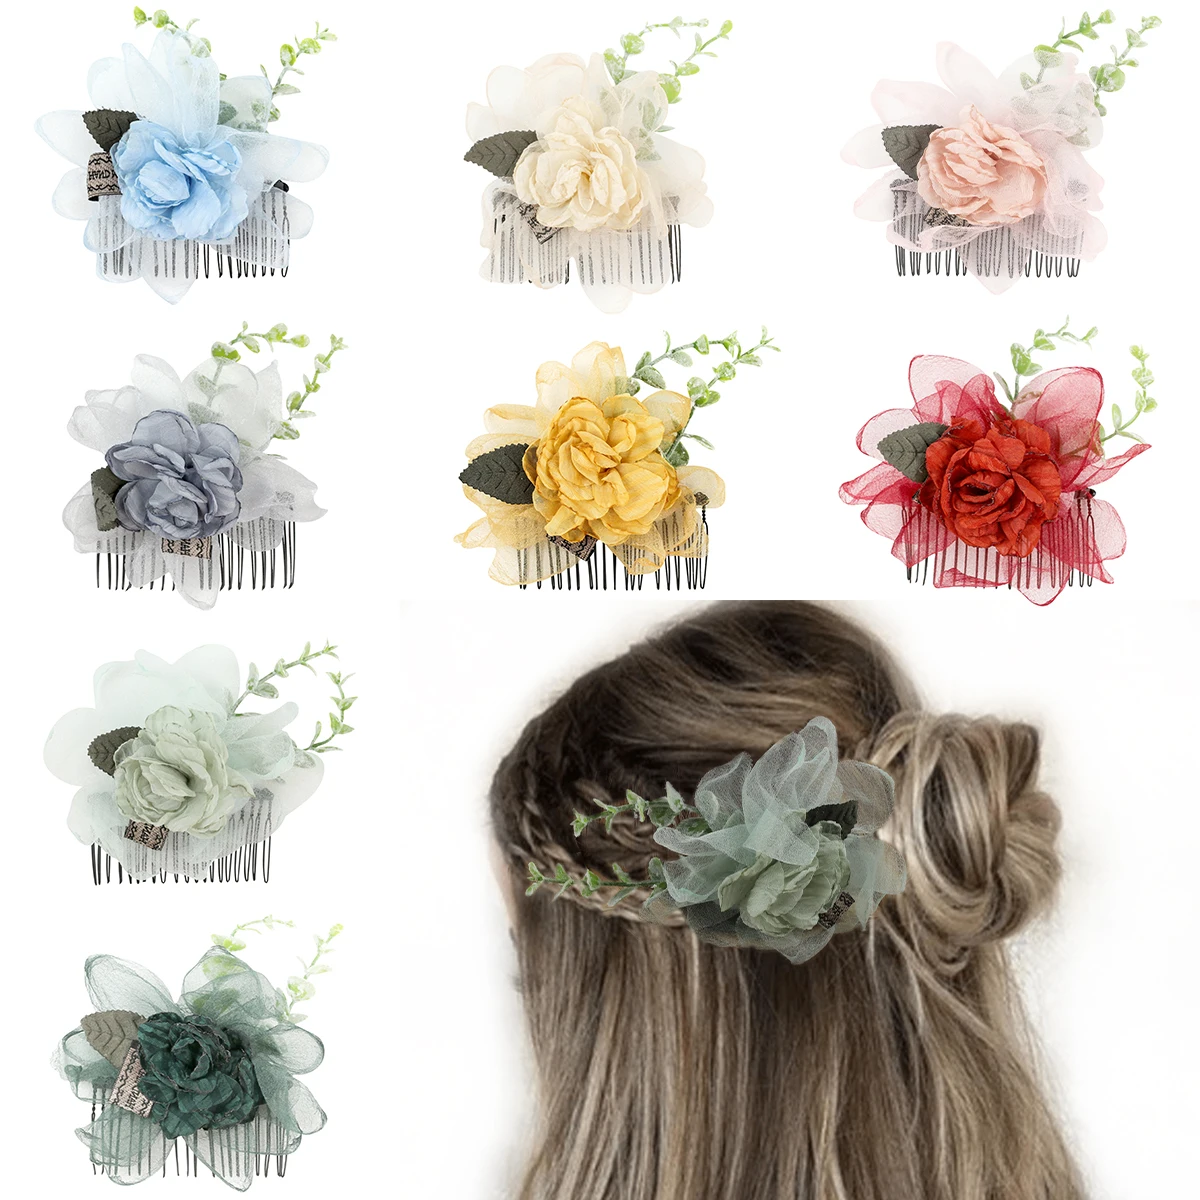 

Boho Bridal Hair Combs Rustic Wedding Floral Women Stimulation Flower Hairpins Brides Hair Accessories Greenery Combs For Girls